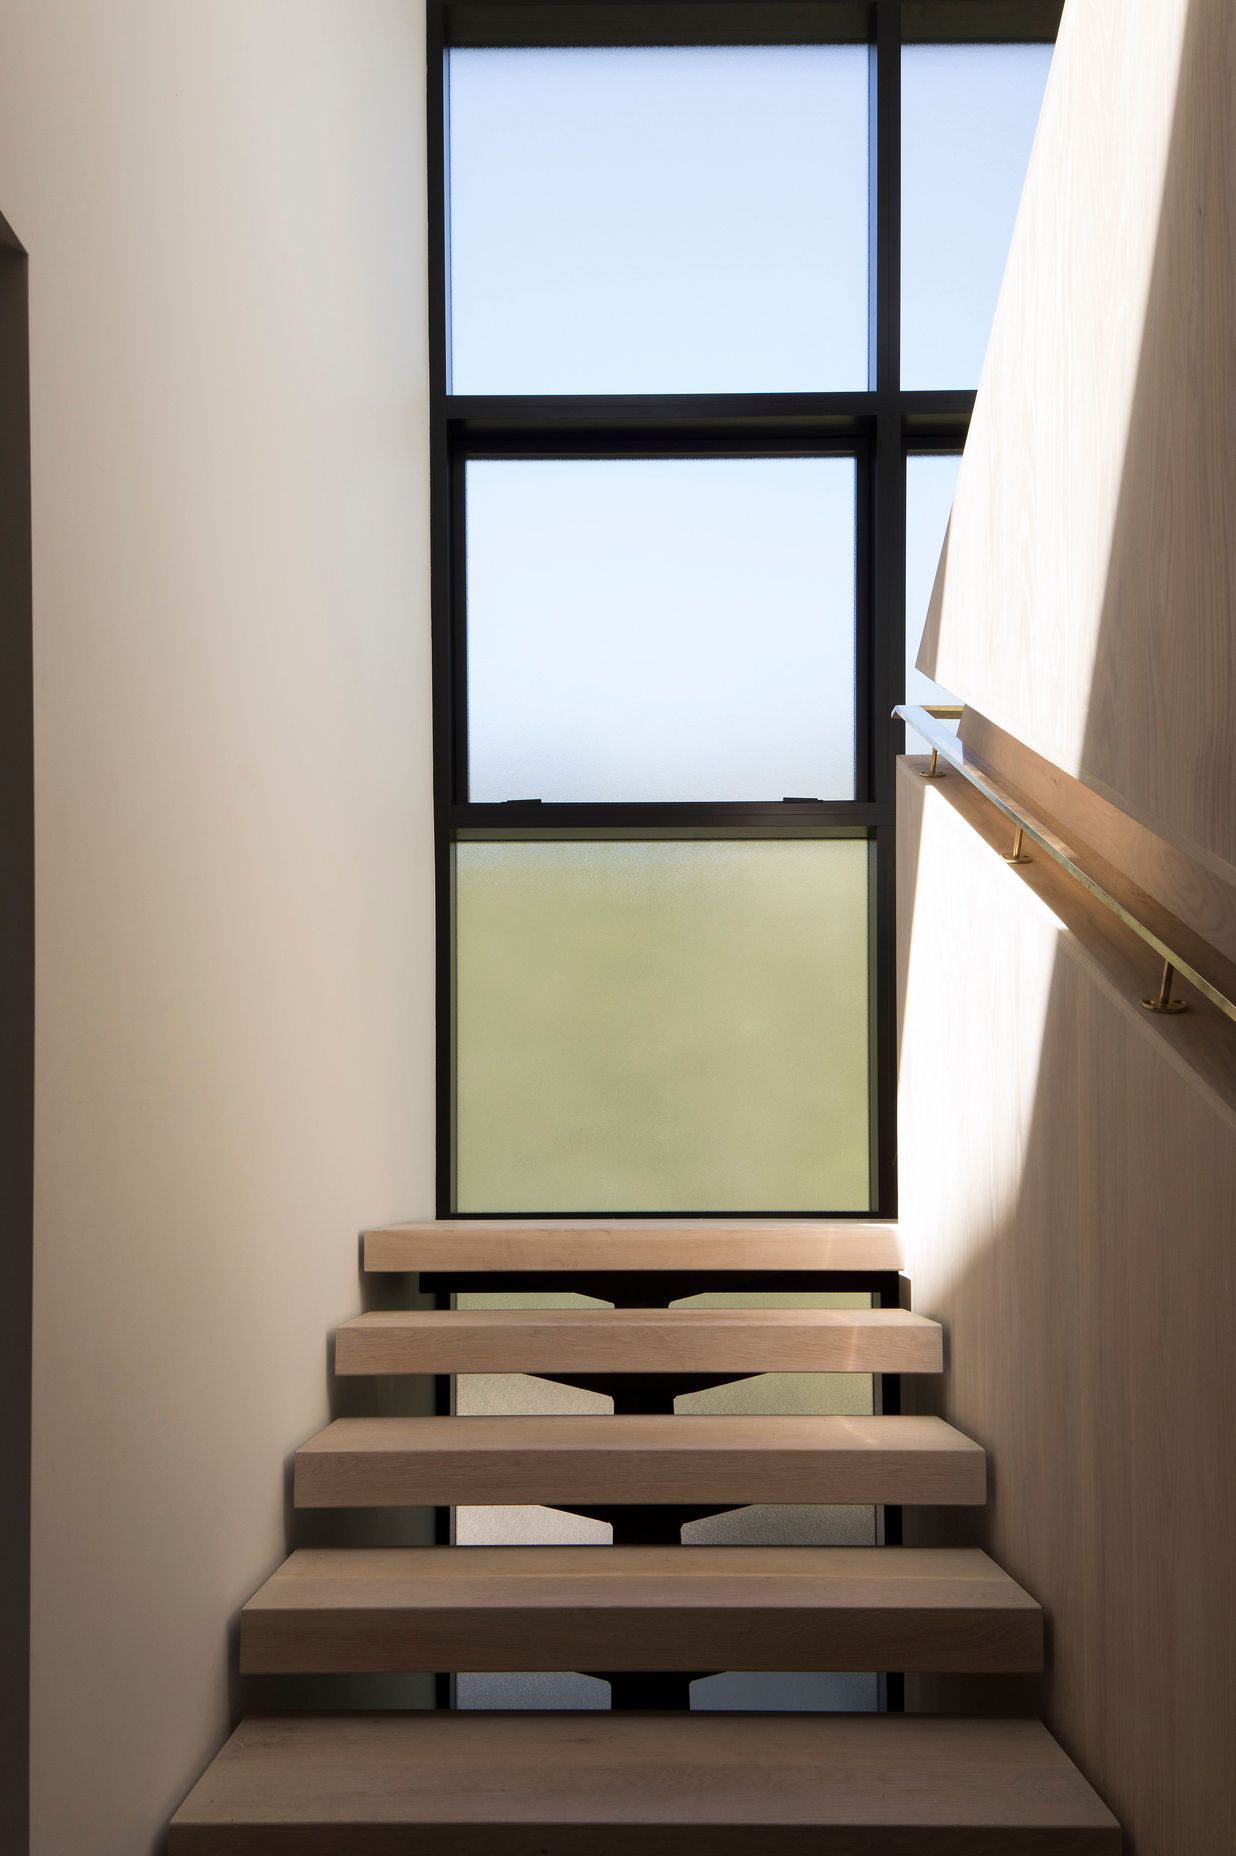 The staircase landing makes the most of the light and the surrounding views.